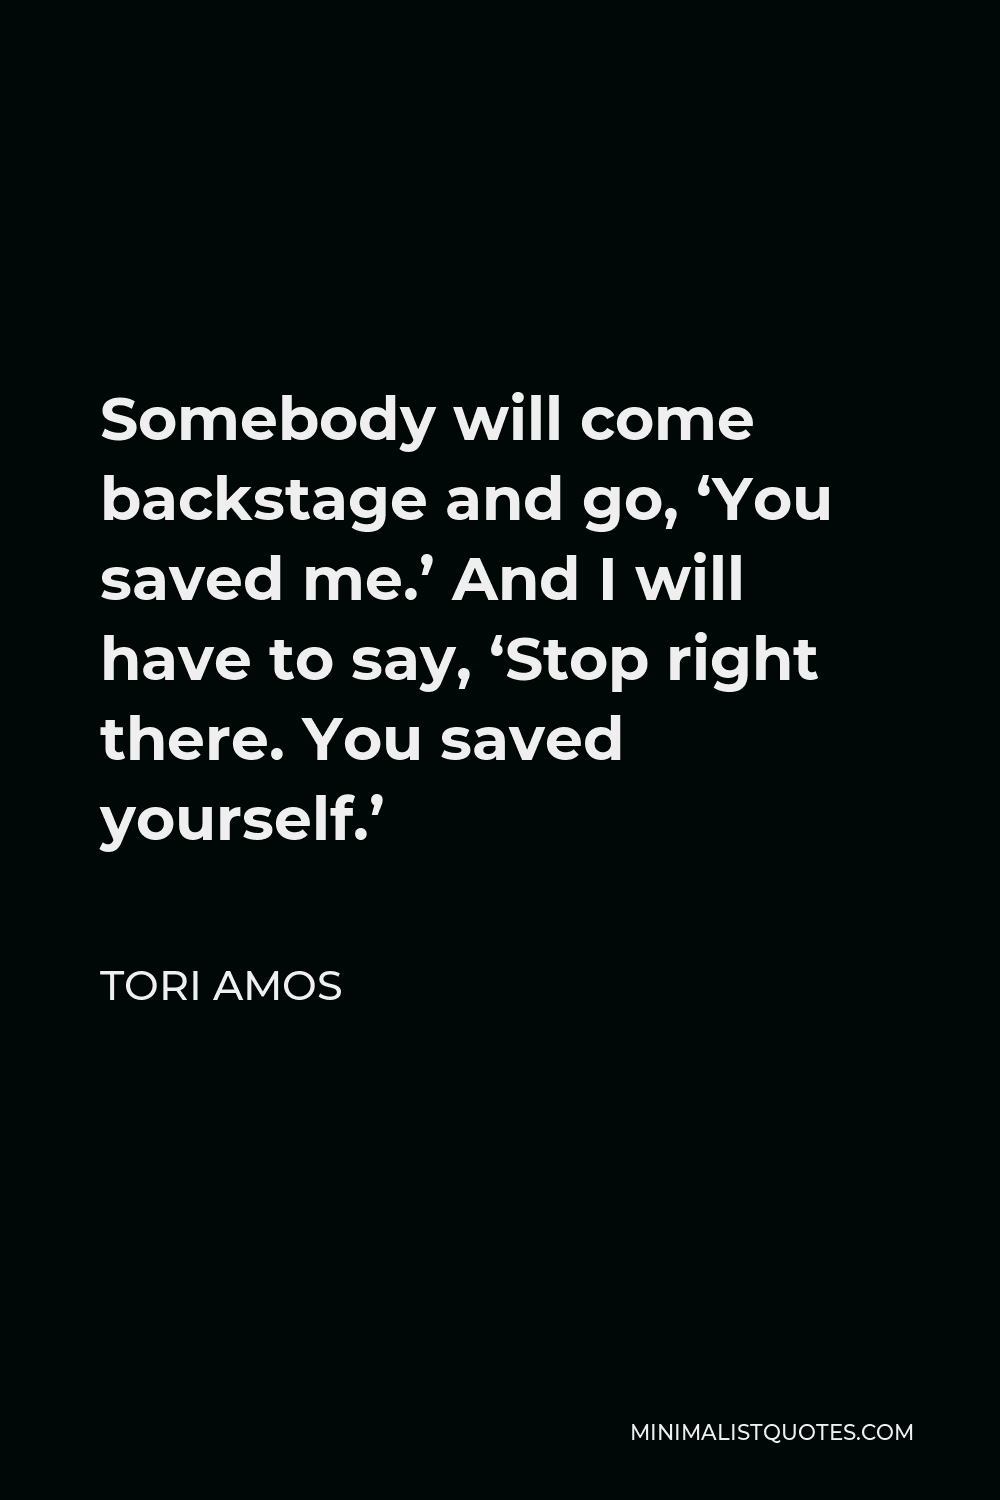 Tori Amos Quote - Somebody will come backstage and go, ‘You saved me.’ And I will have to say, ‘Stop right there. You saved yourself.’